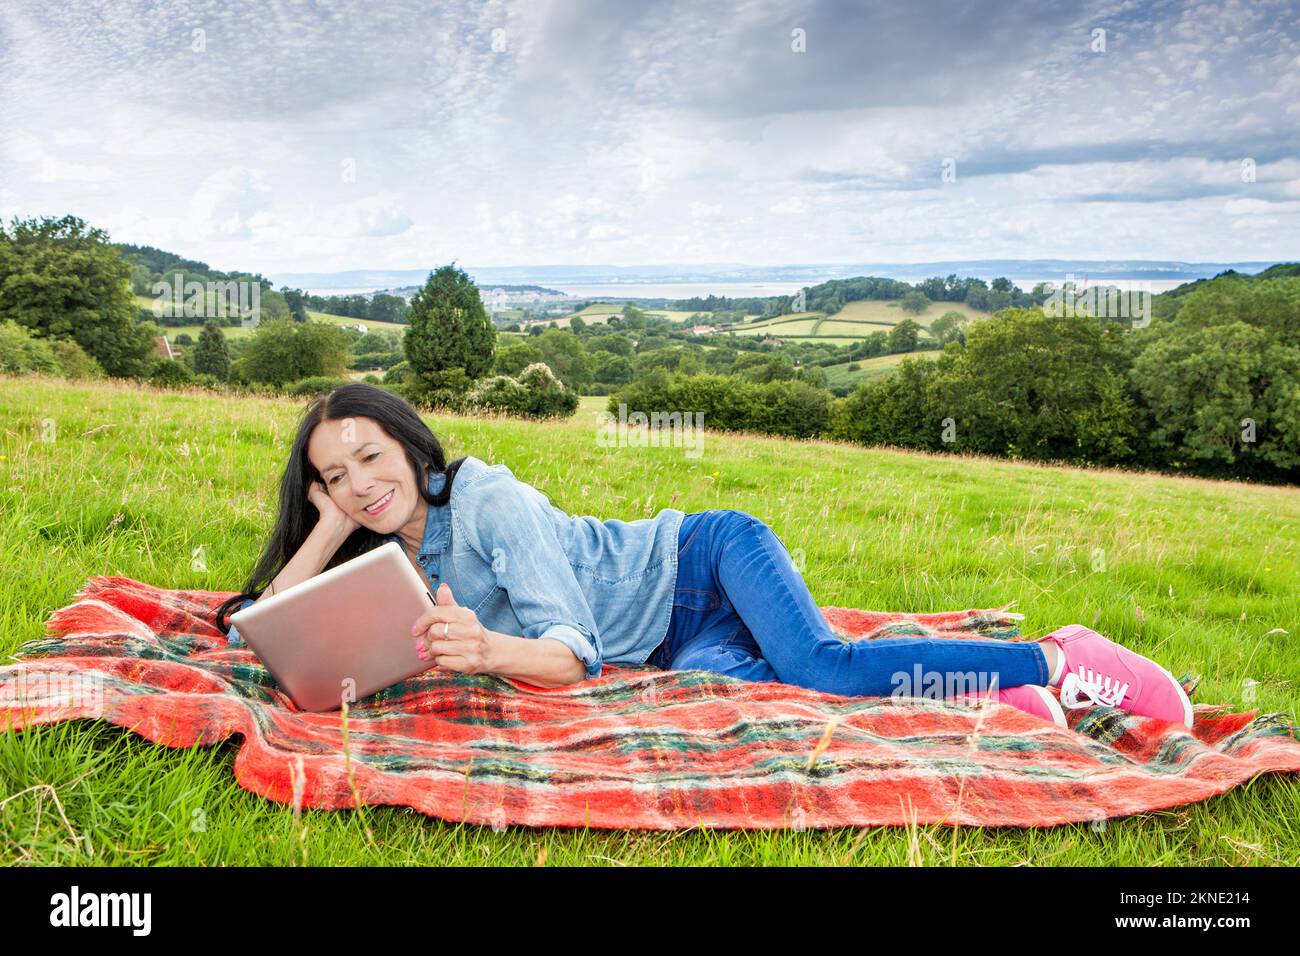 Woman lying down and relaxing in a grassy field Stock Photo